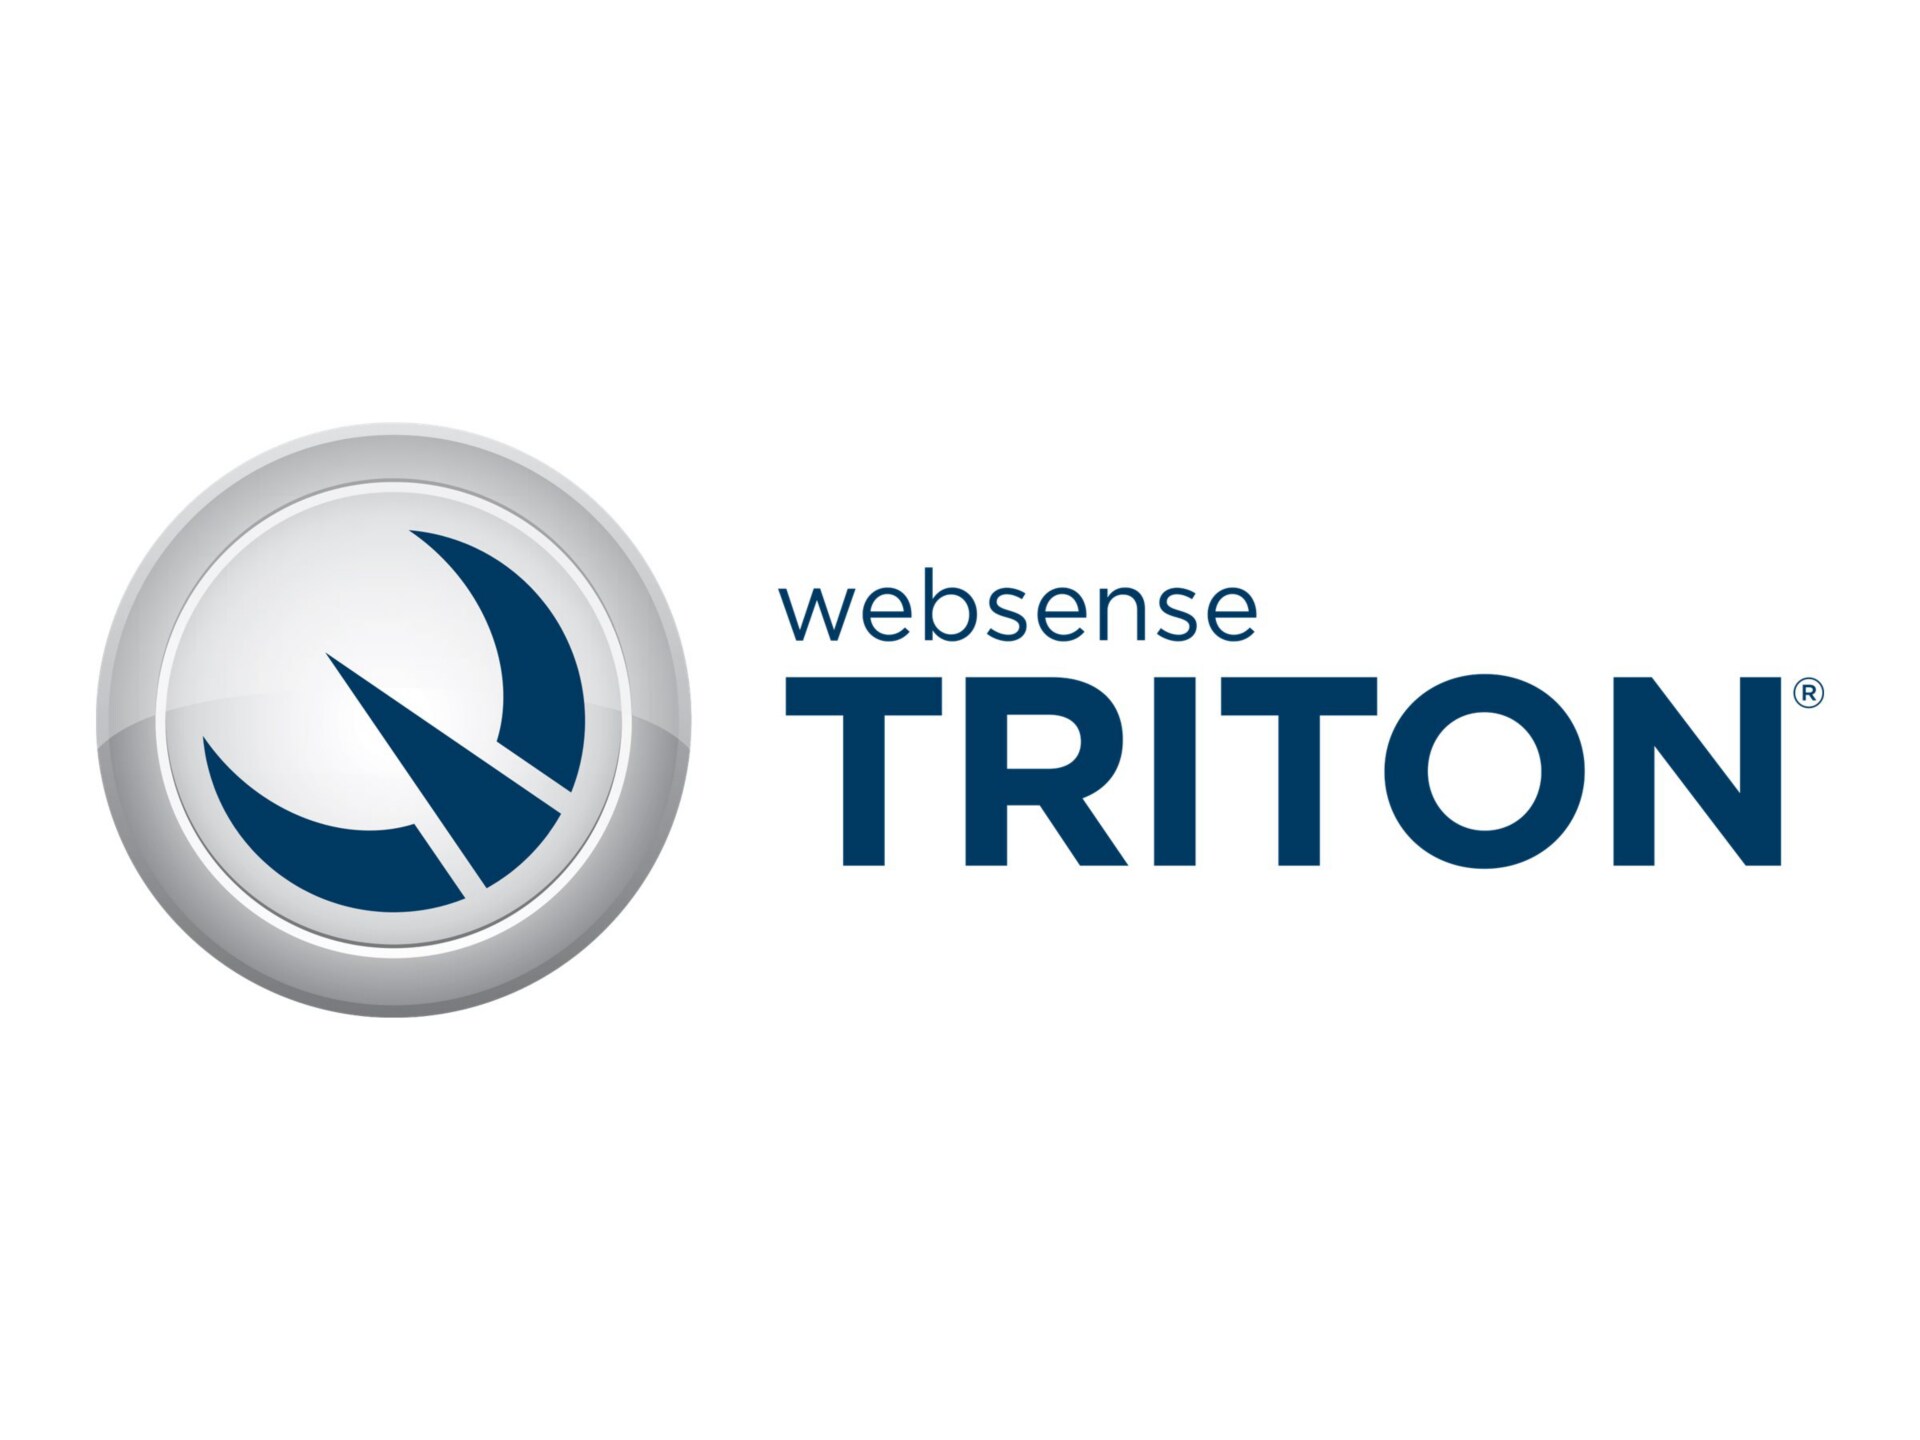 TRITON Security Gateway - subscription license renewal (2 years) - 1 seat